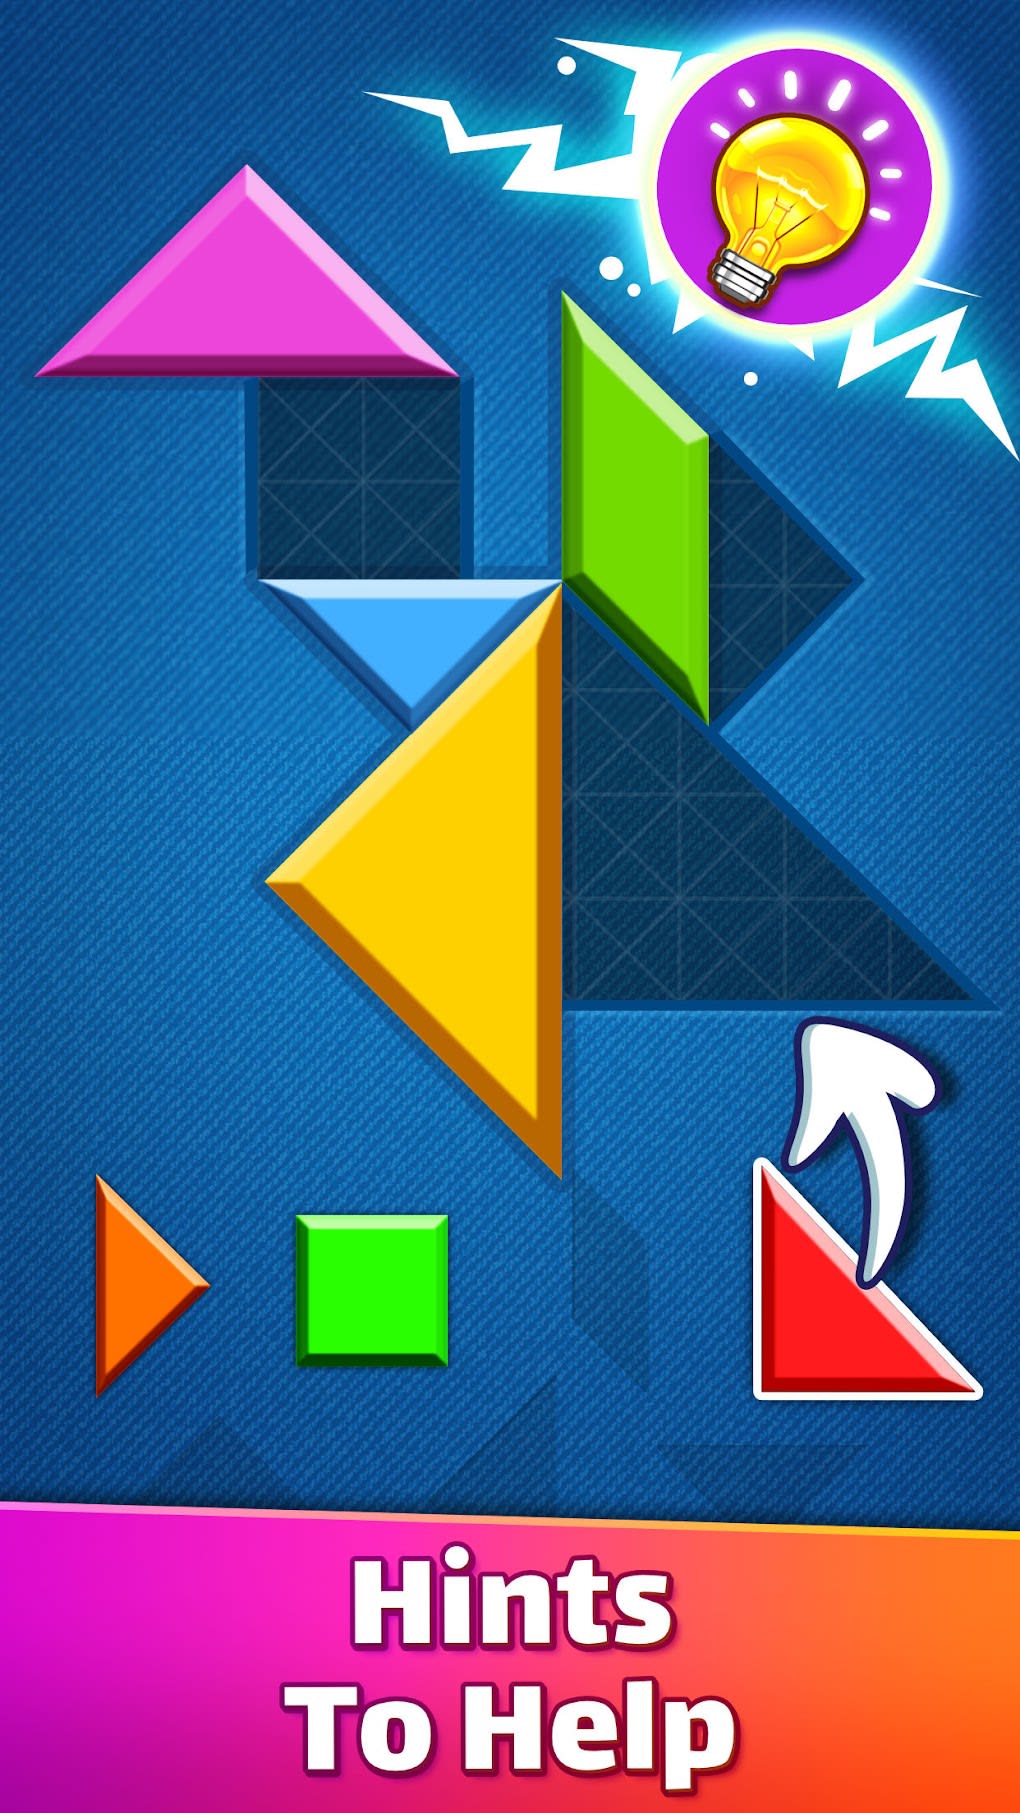 Tangram Puzzle: Polygrams Game for iphone instal